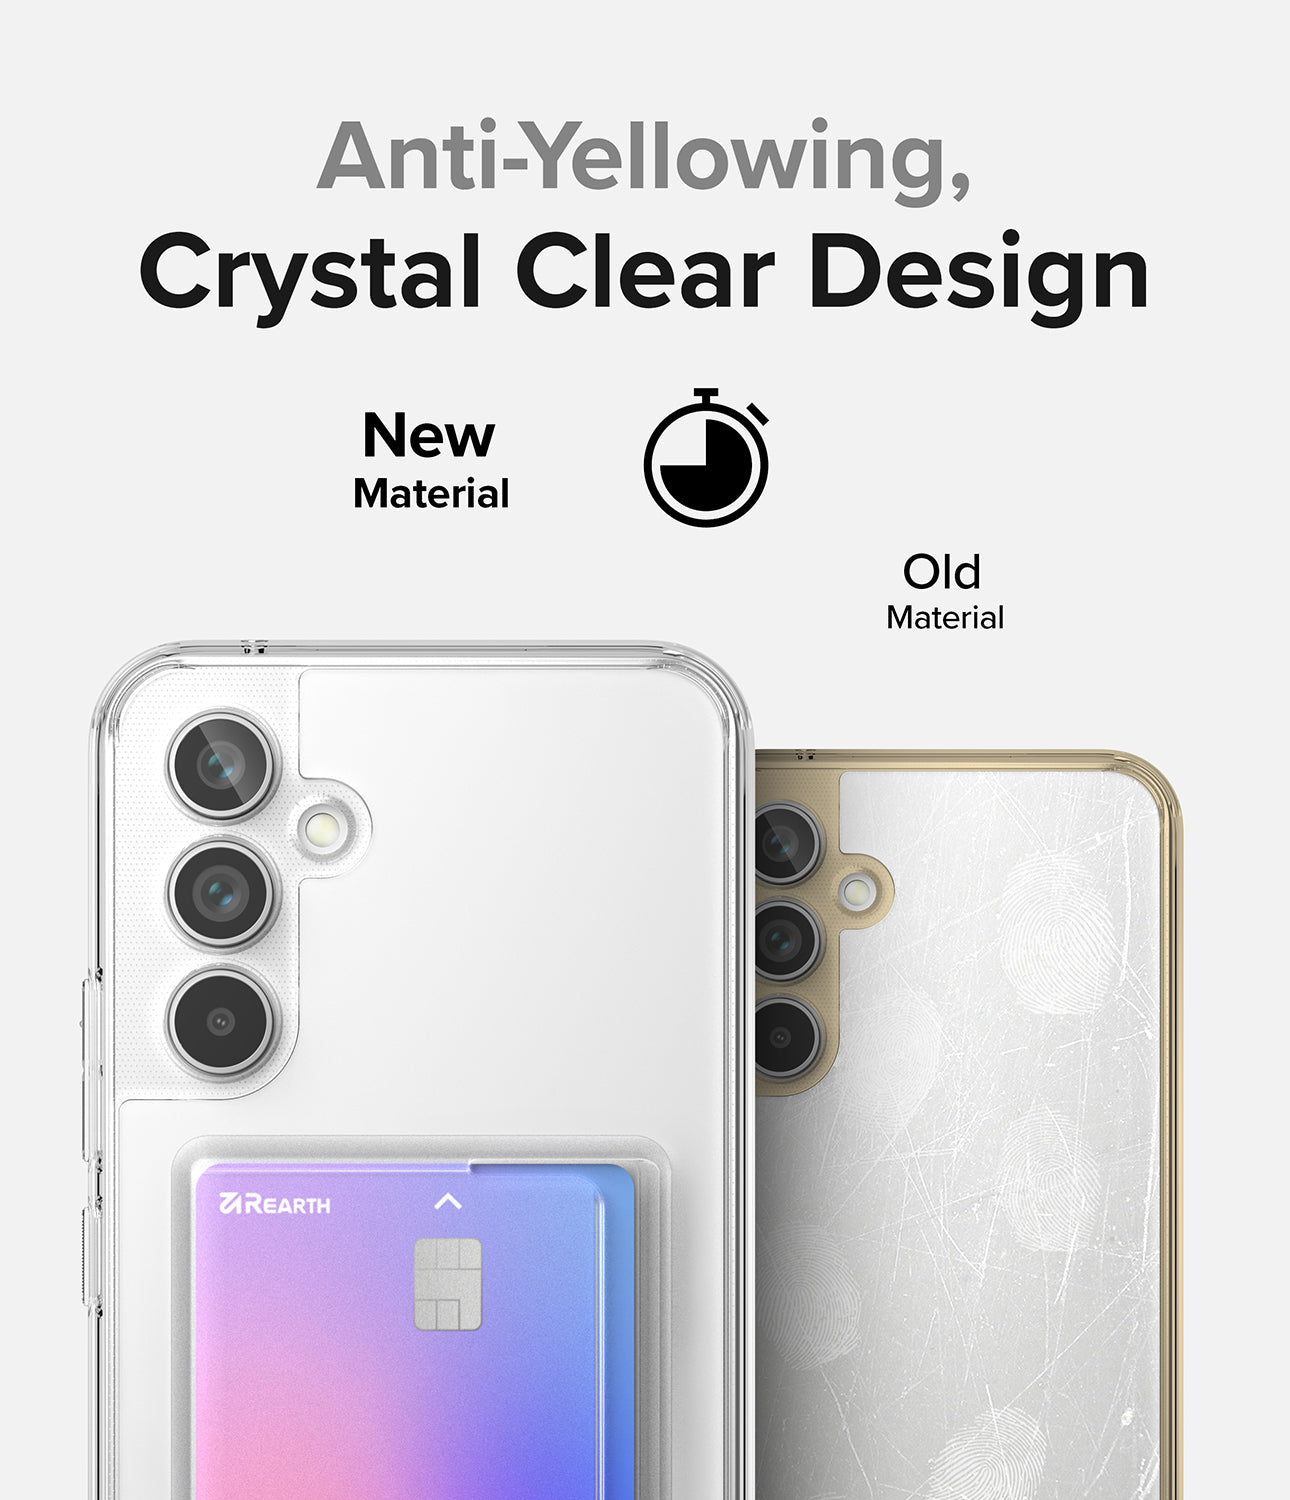 Anti-Yellowing crystal clear design